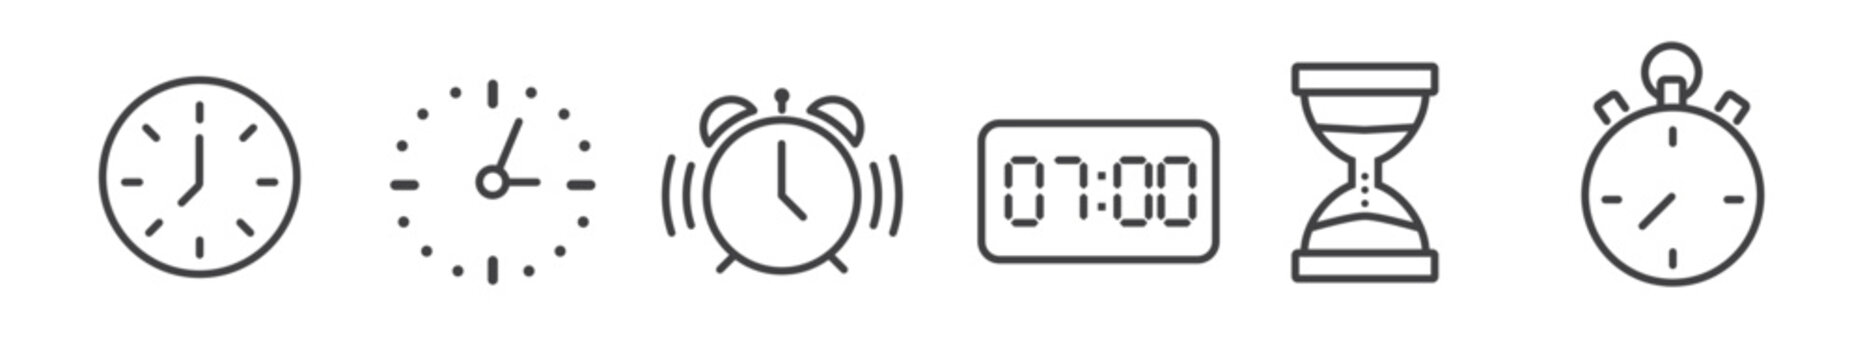 thin line icon set 02 business - time and clock